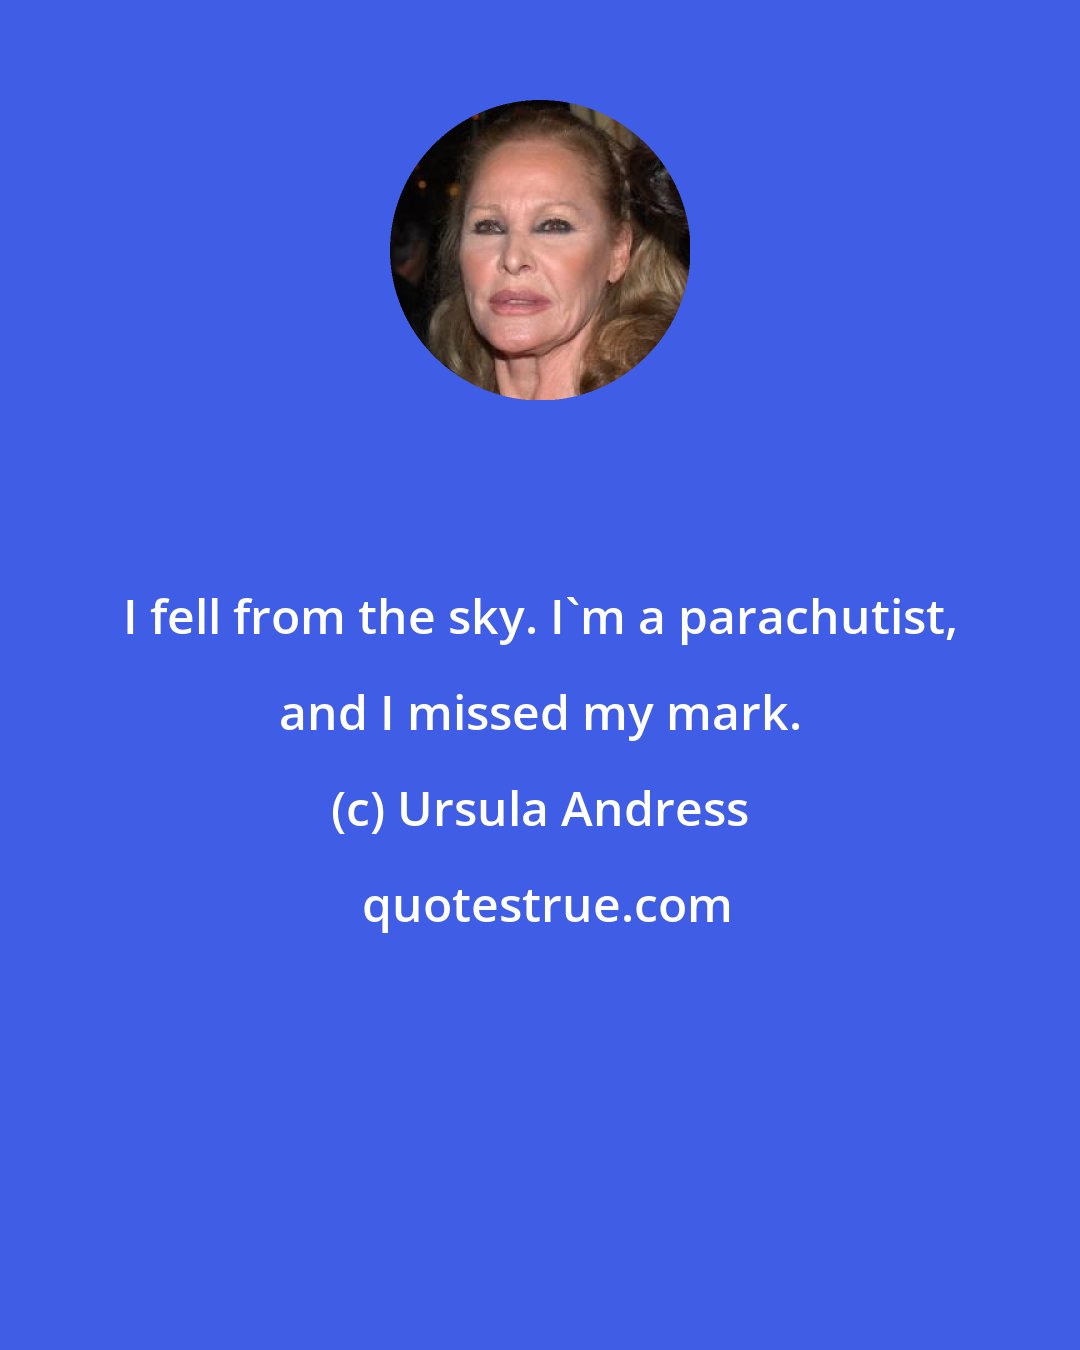 Ursula Andress: I fell from the sky. I'm a parachutist, and I missed my mark.